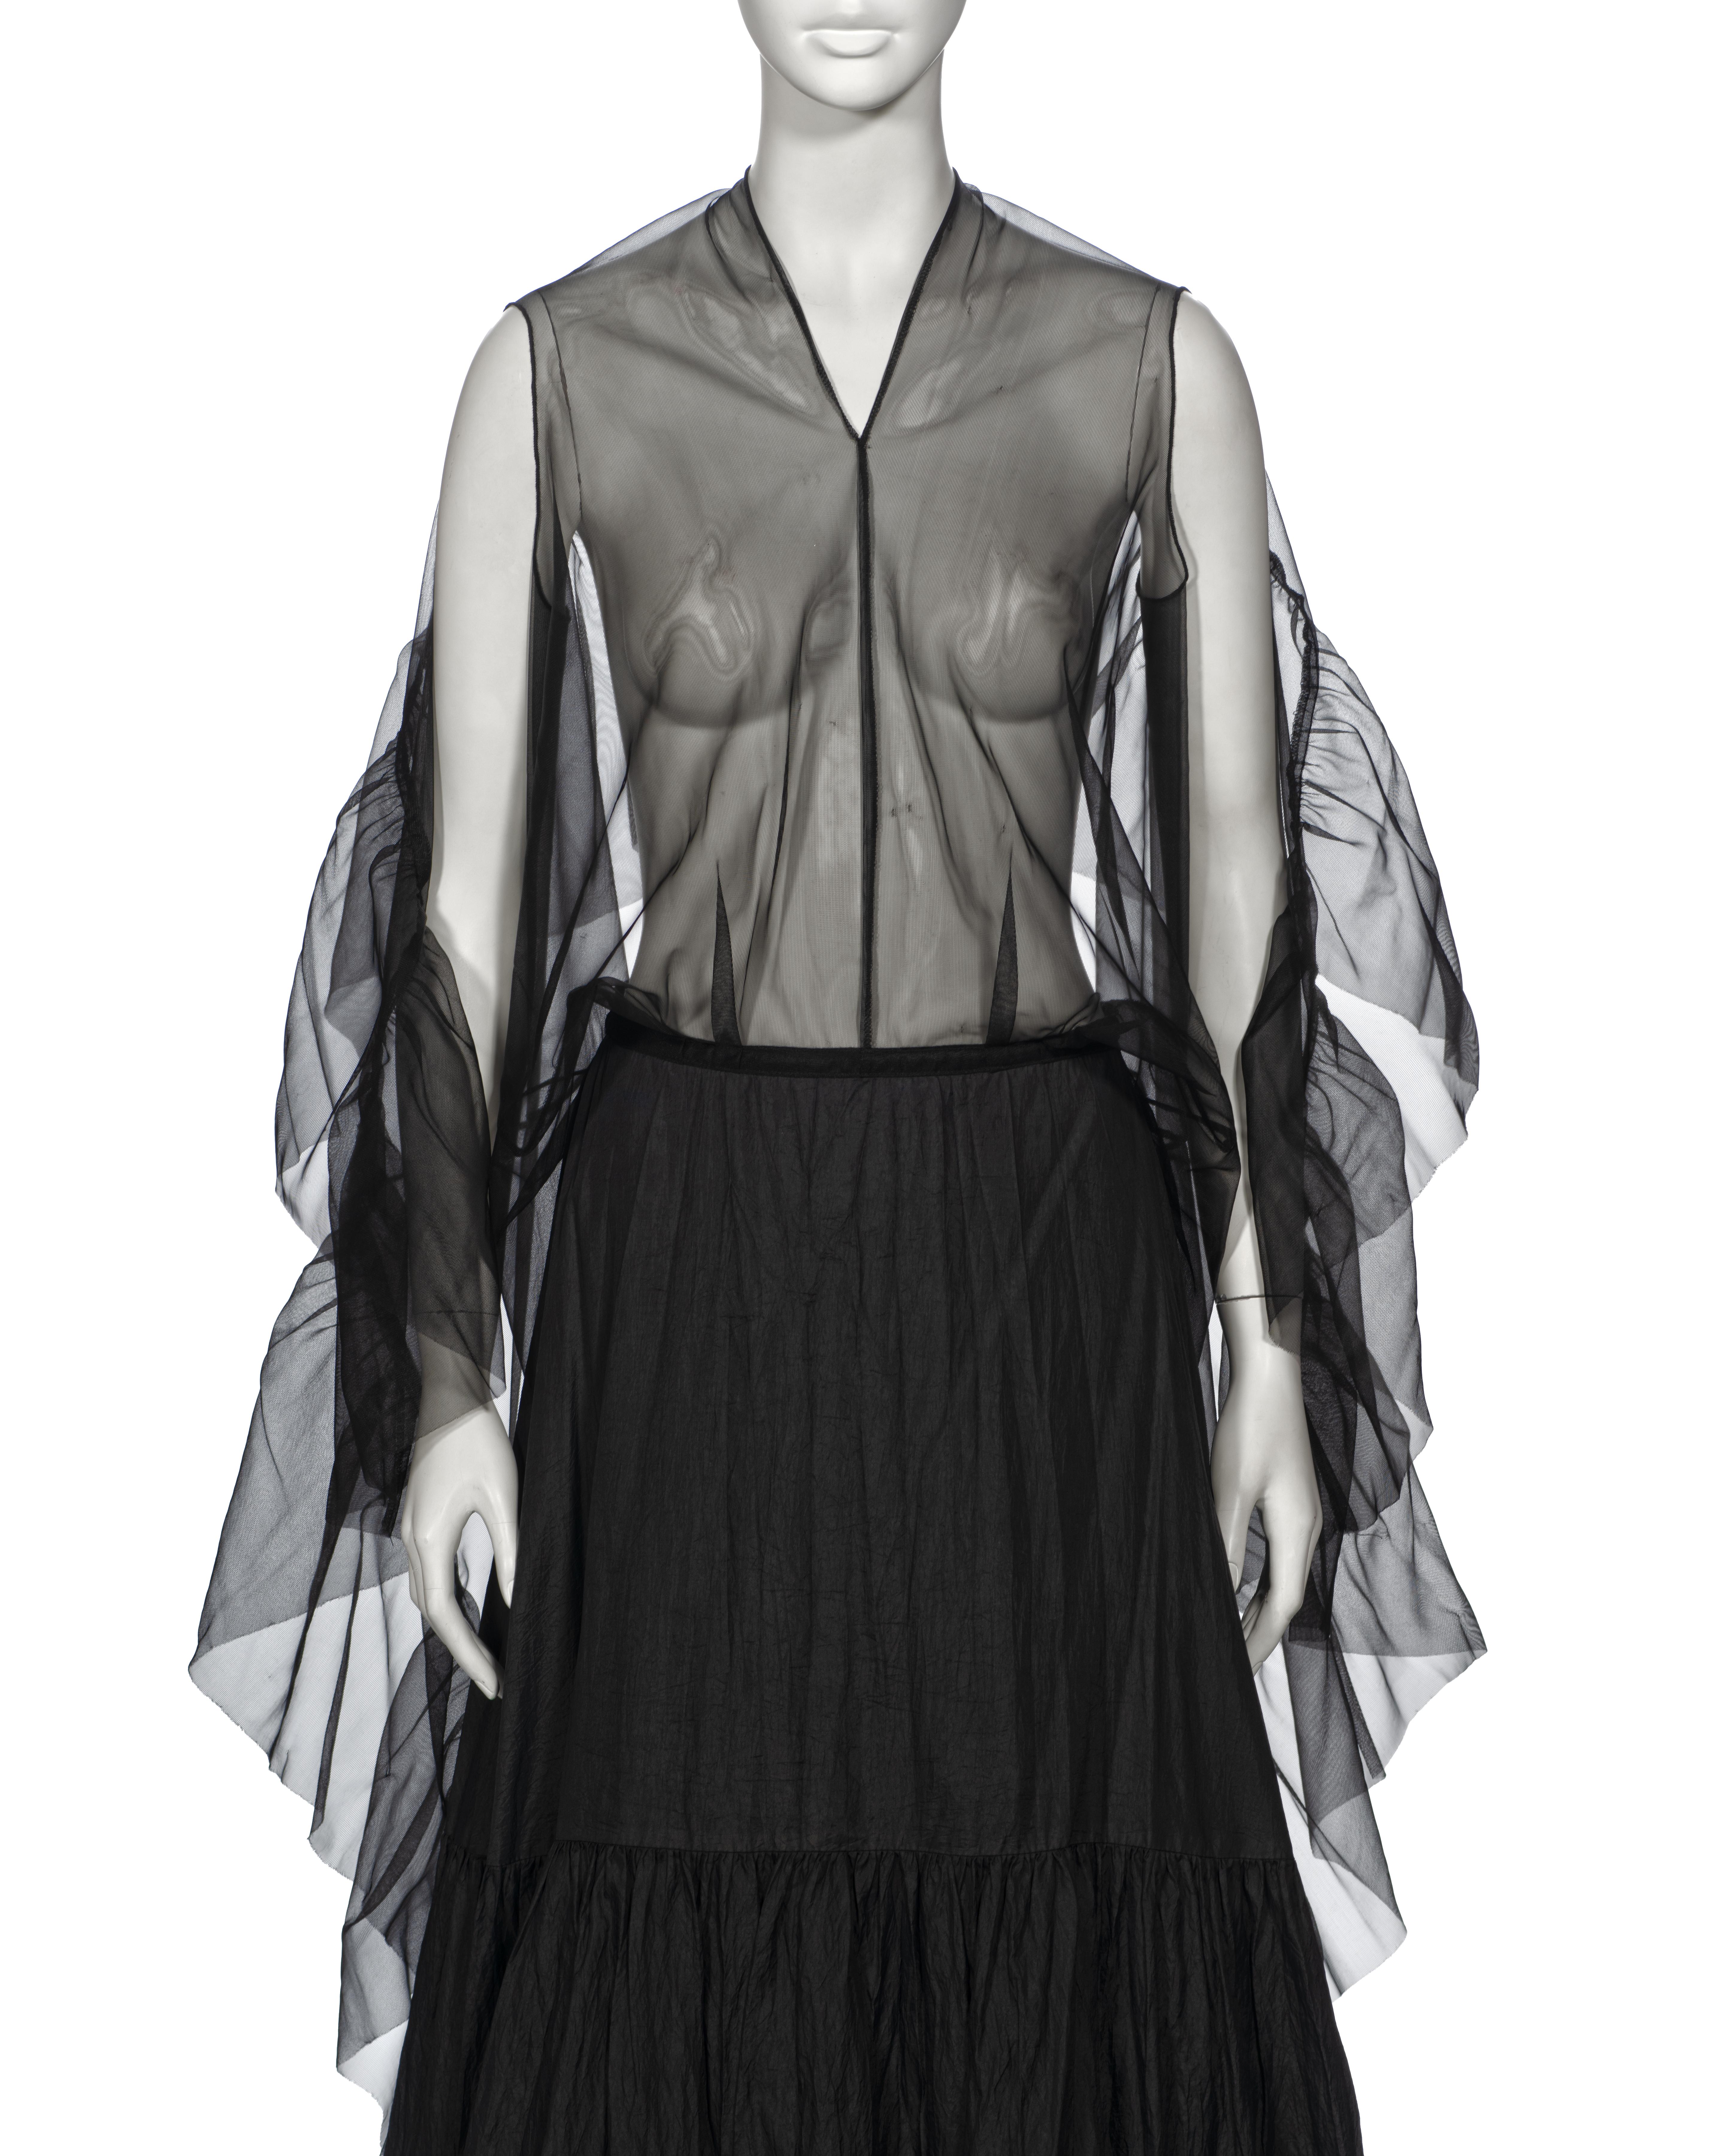 Martin Margiela Artisanal Evening Dress Made Out Of Vintage Petticoats, ss 2003 In Good Condition For Sale In London, GB